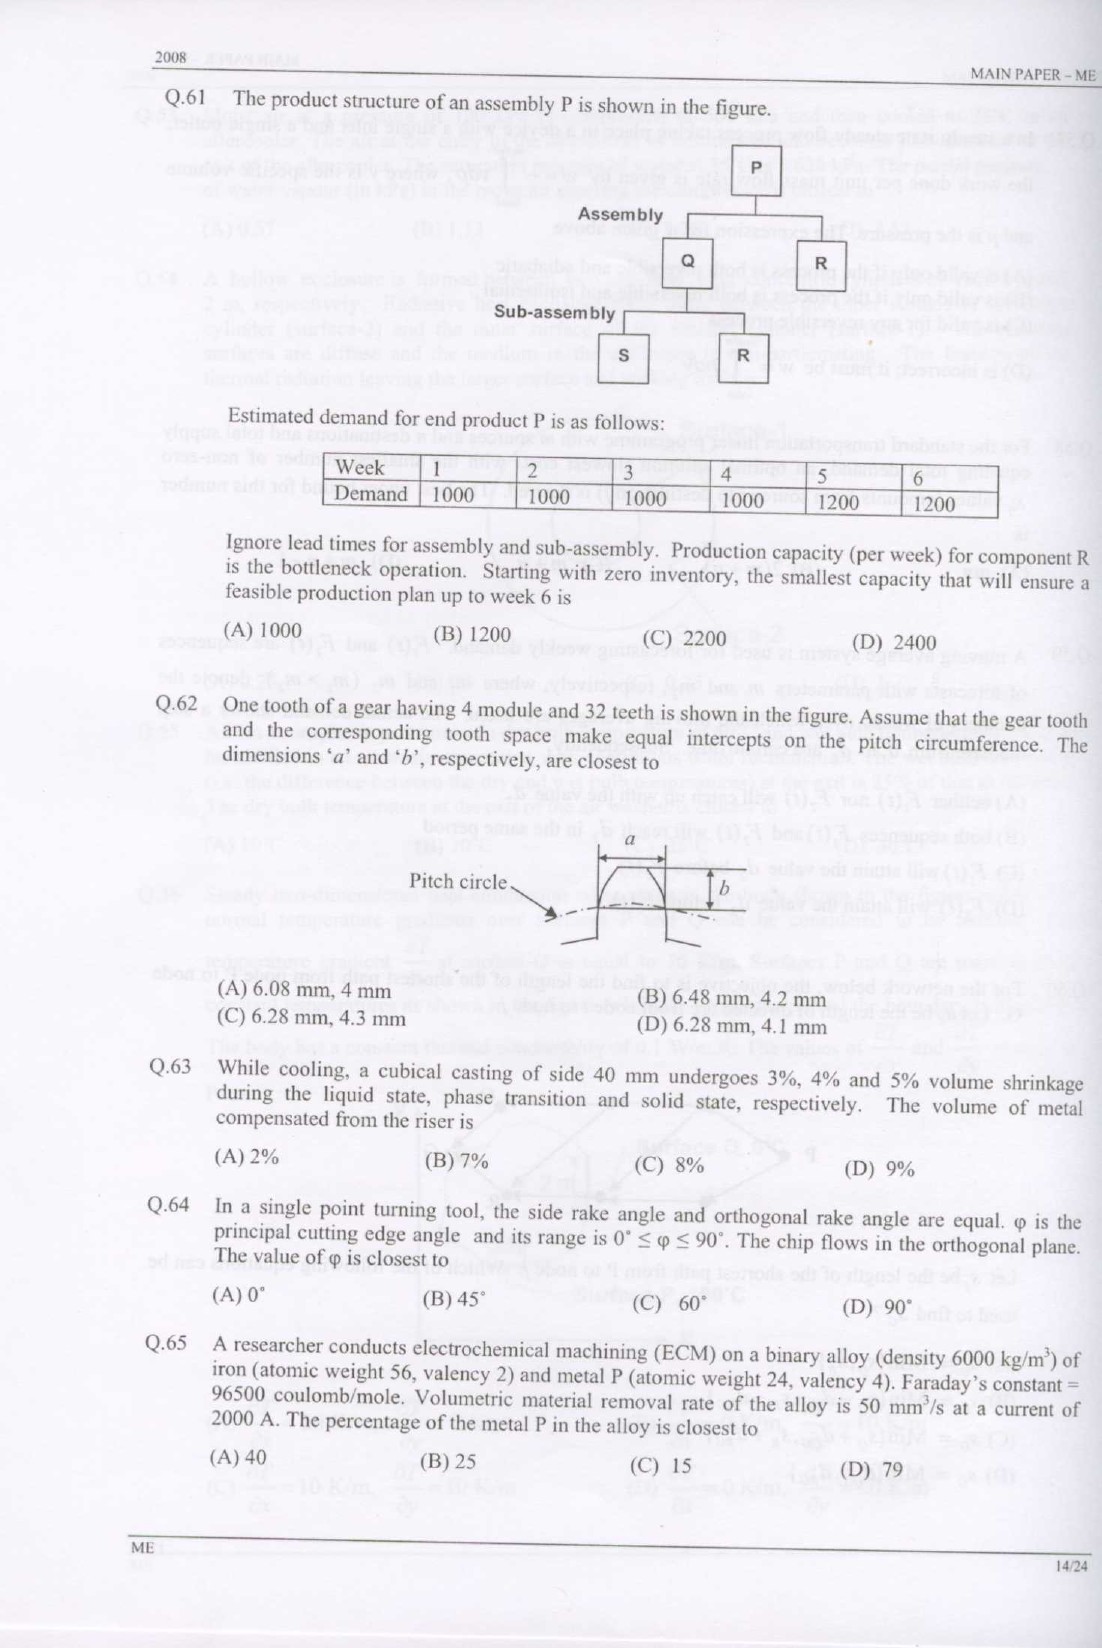 GATE Exam Question Paper 2008 Mechanical Engineering 14